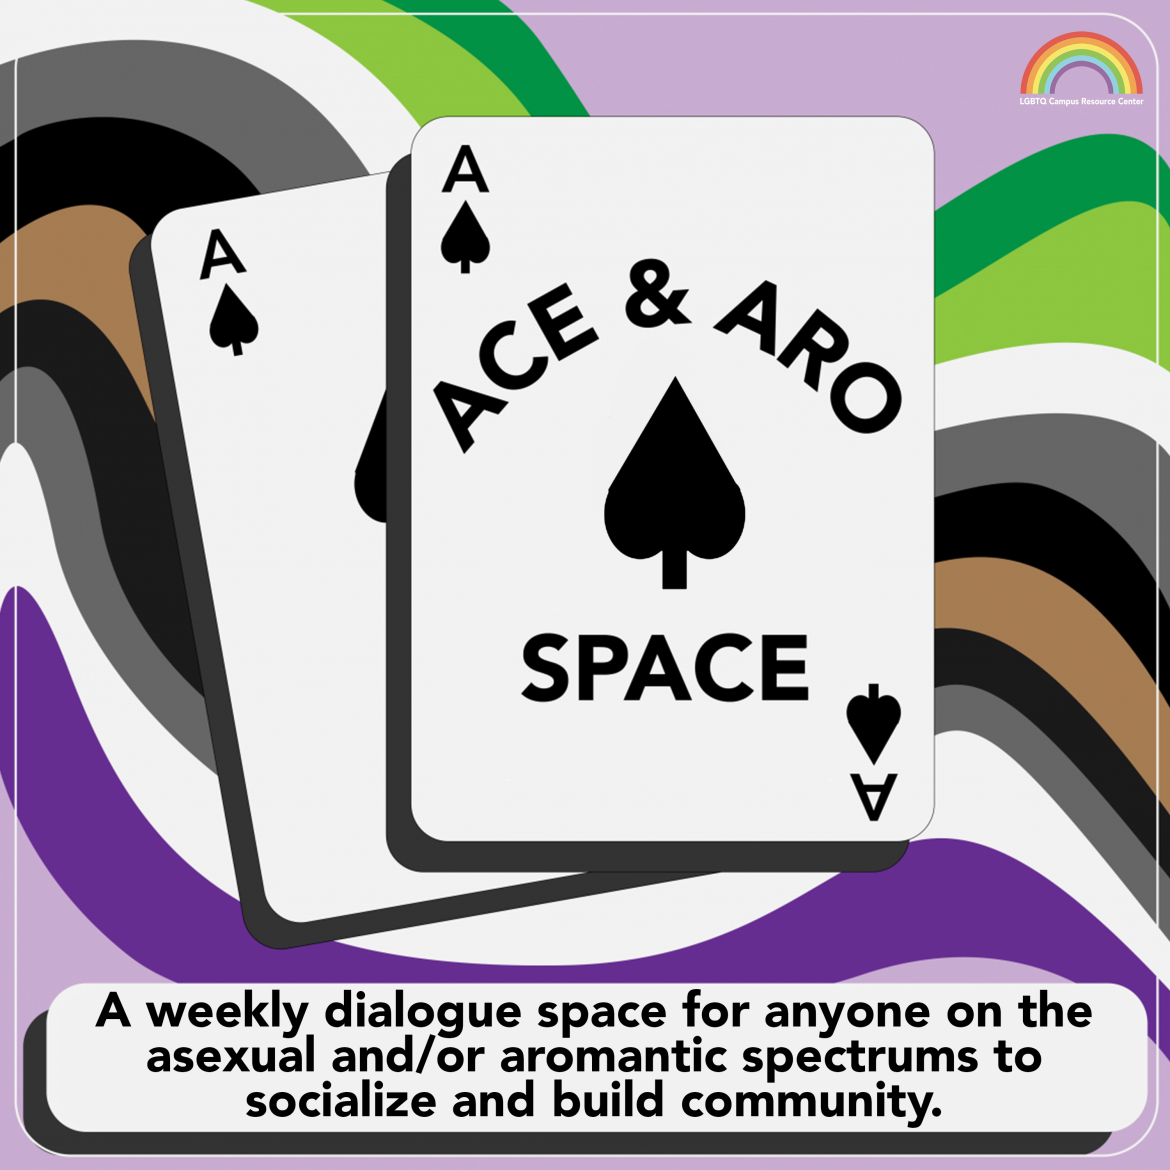 [At the center of the graphic is an ace of spades playing card, with the words, “Ace & Aro Space” written in all-caps. There is another ace of spades behind it. The text at the bottom reads, “A weekly dialogue space for anyone on the asexual and/or aromantic spectrums to socialize and build community.” The background is light purple, with a curving asexual pride flag and aromantic pride flag flowing through it. The UCLA LGBTQ CRC Rainbow Signature is in the top right corner.]